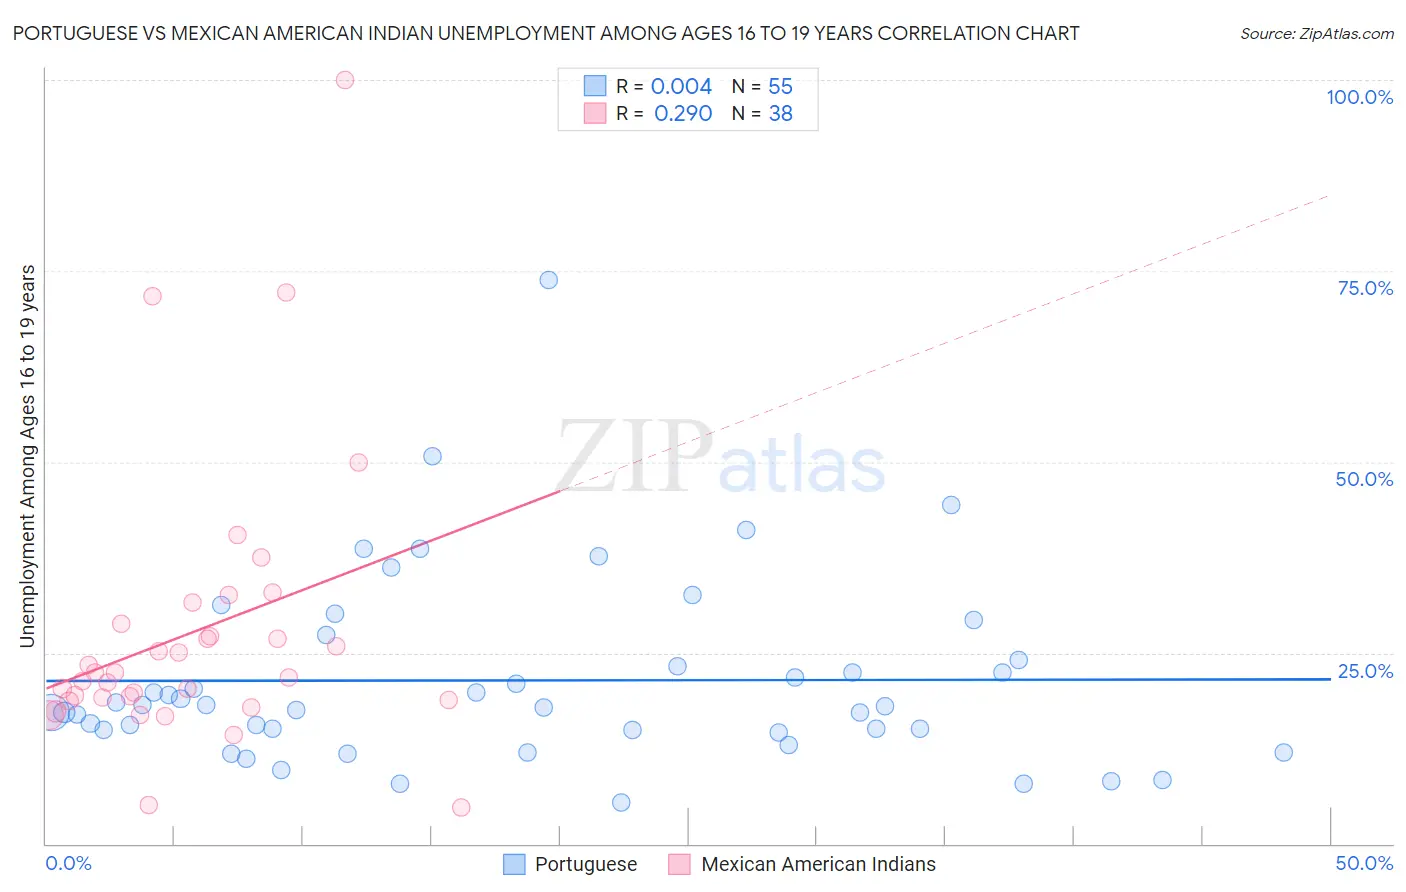 Portuguese vs Mexican American Indian Unemployment Among Ages 16 to 19 years